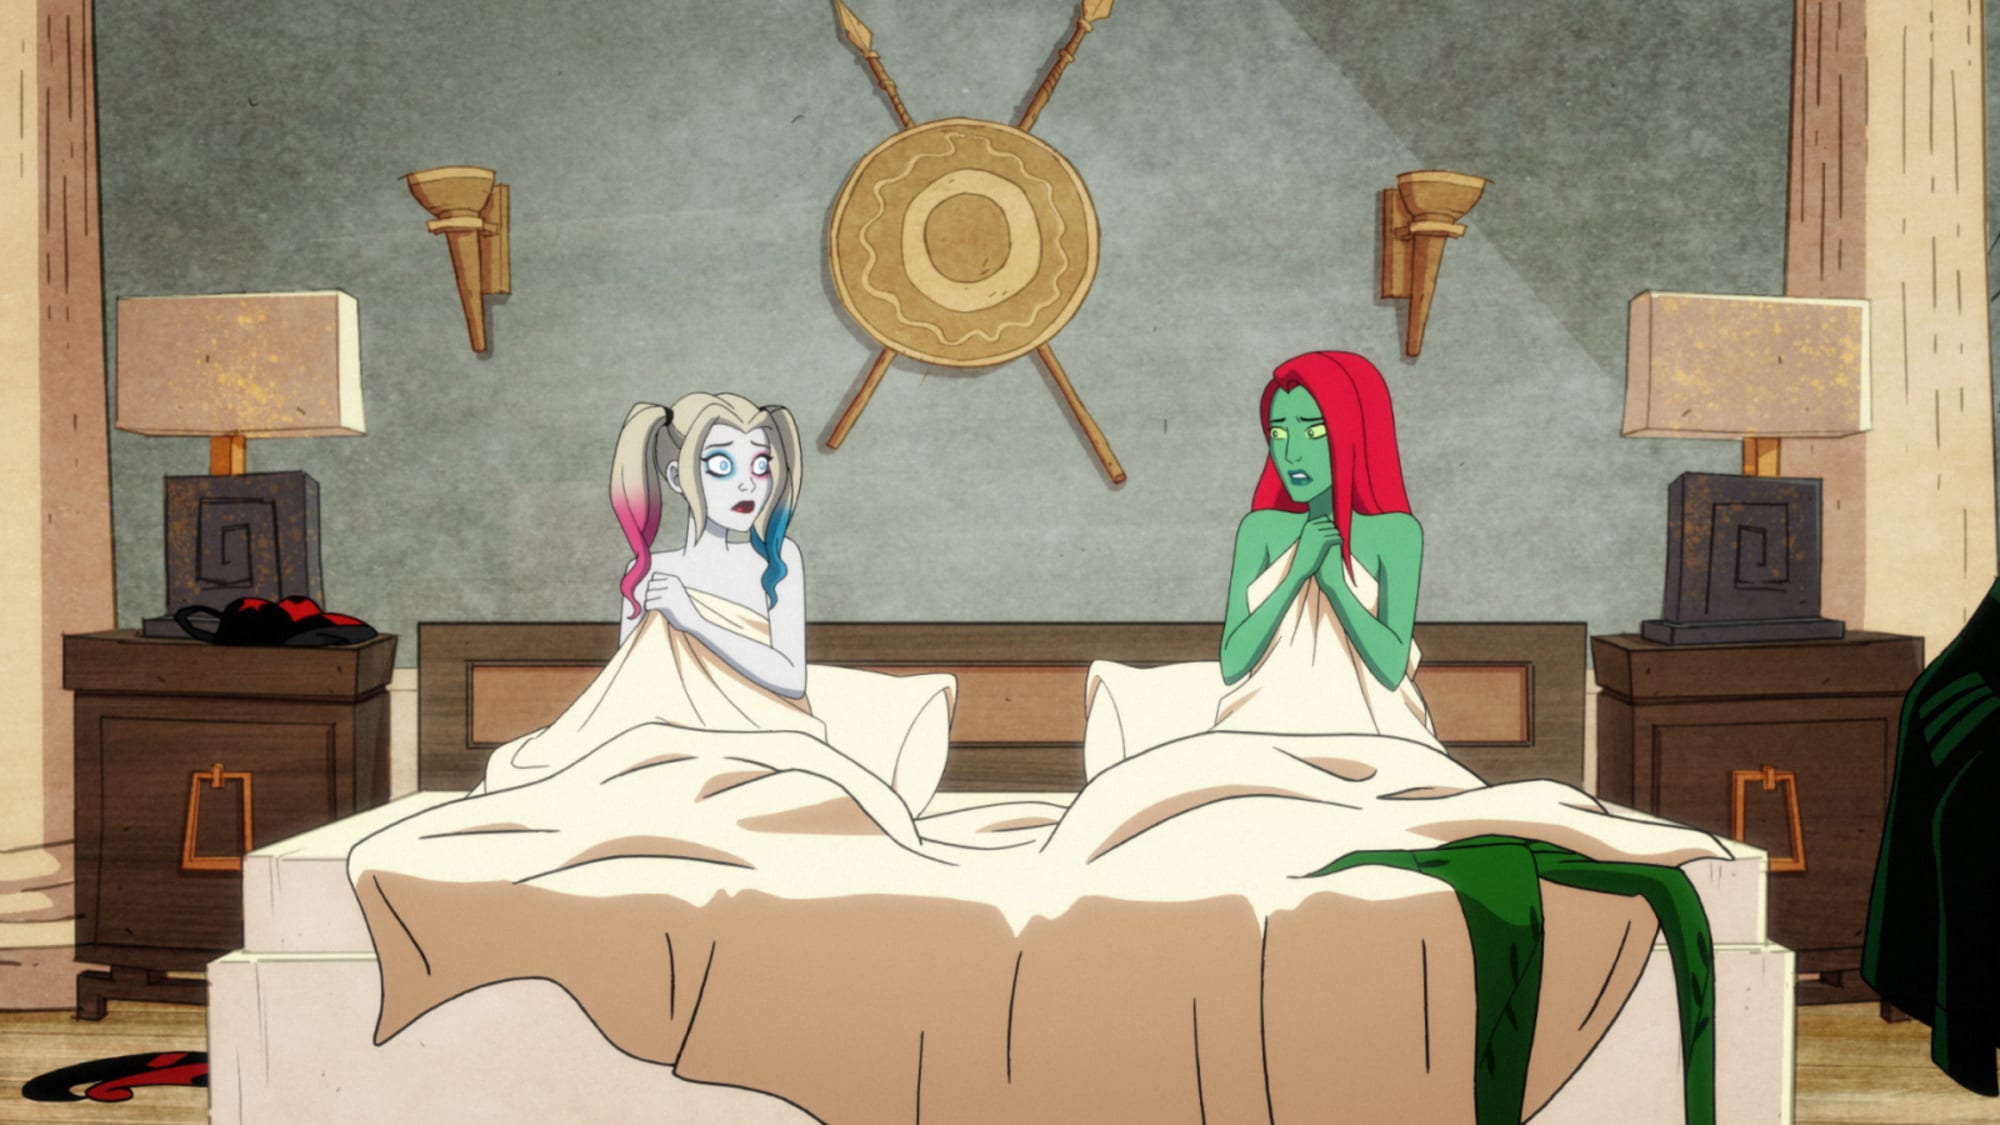 Harley and Poison Ivy tangles in the sheets of their bed seemingly annoyed at each other